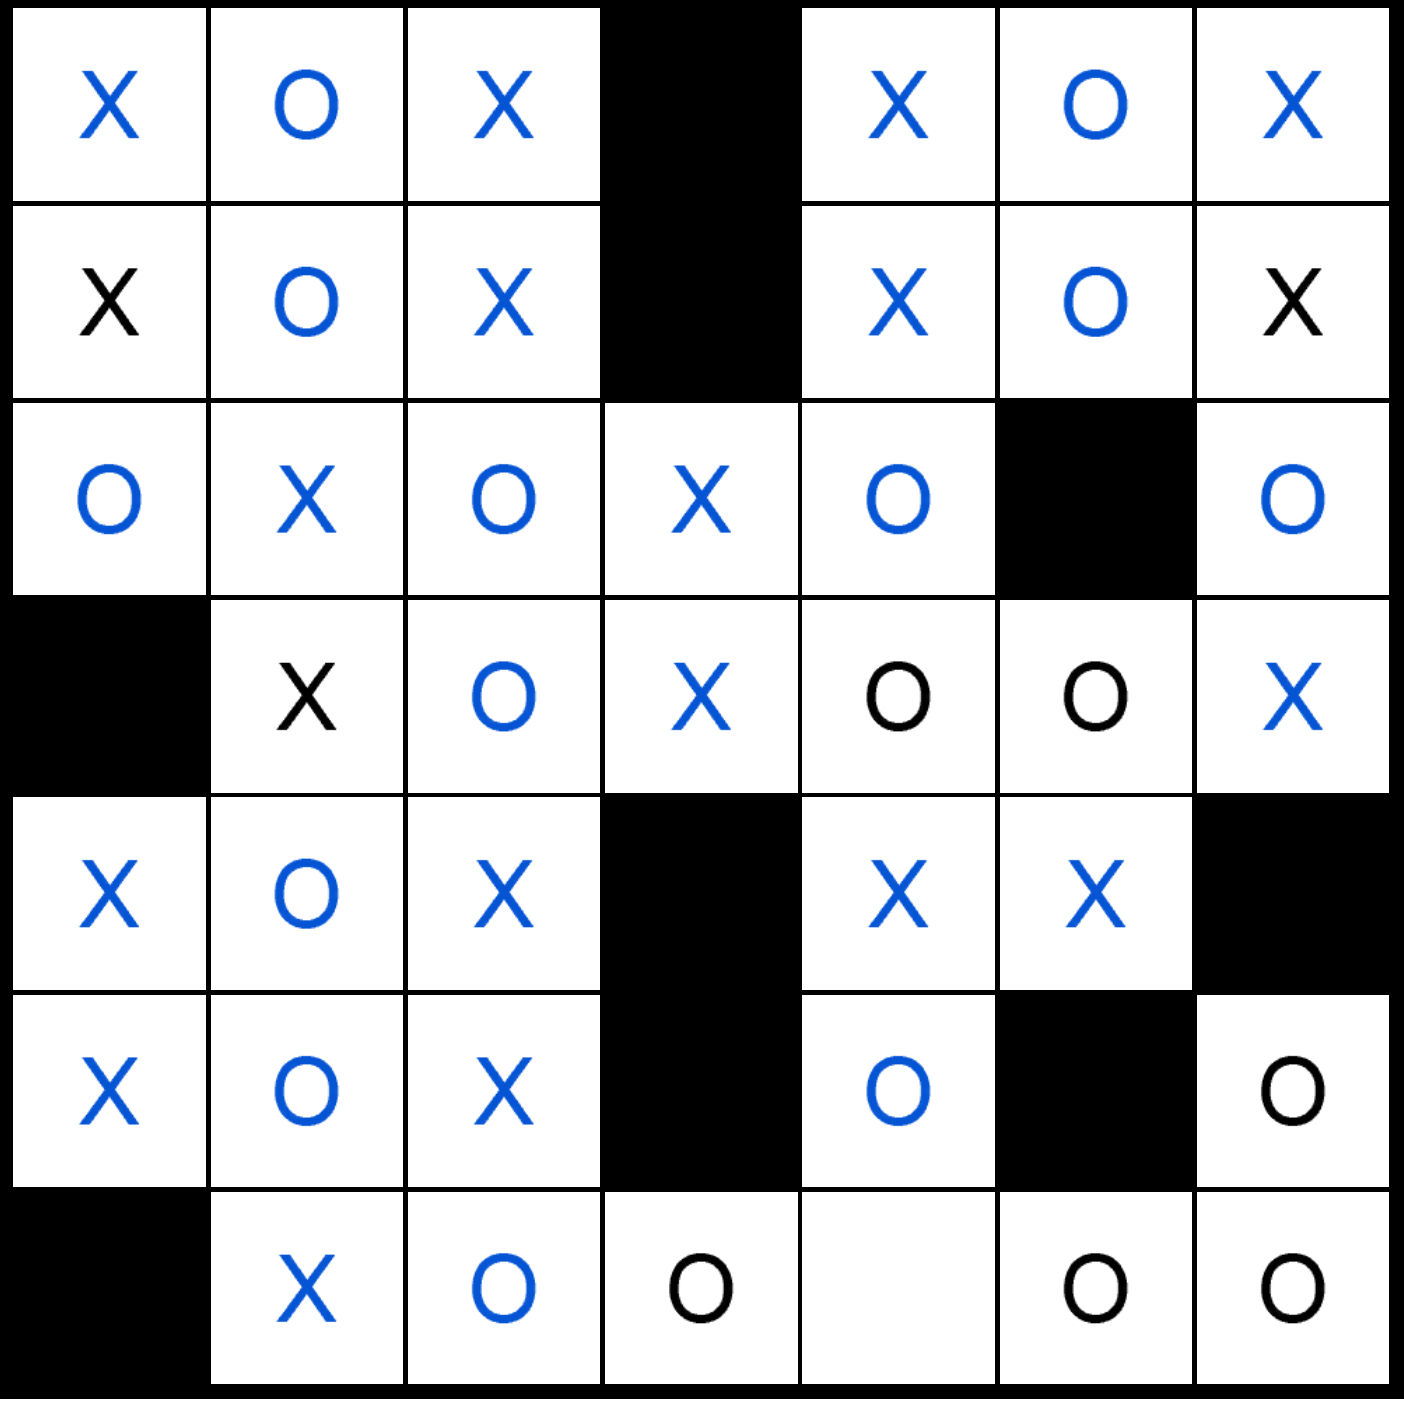 Puzzle Page Os and Xs March 16 2020 Answers PuzzlePageAnswers net